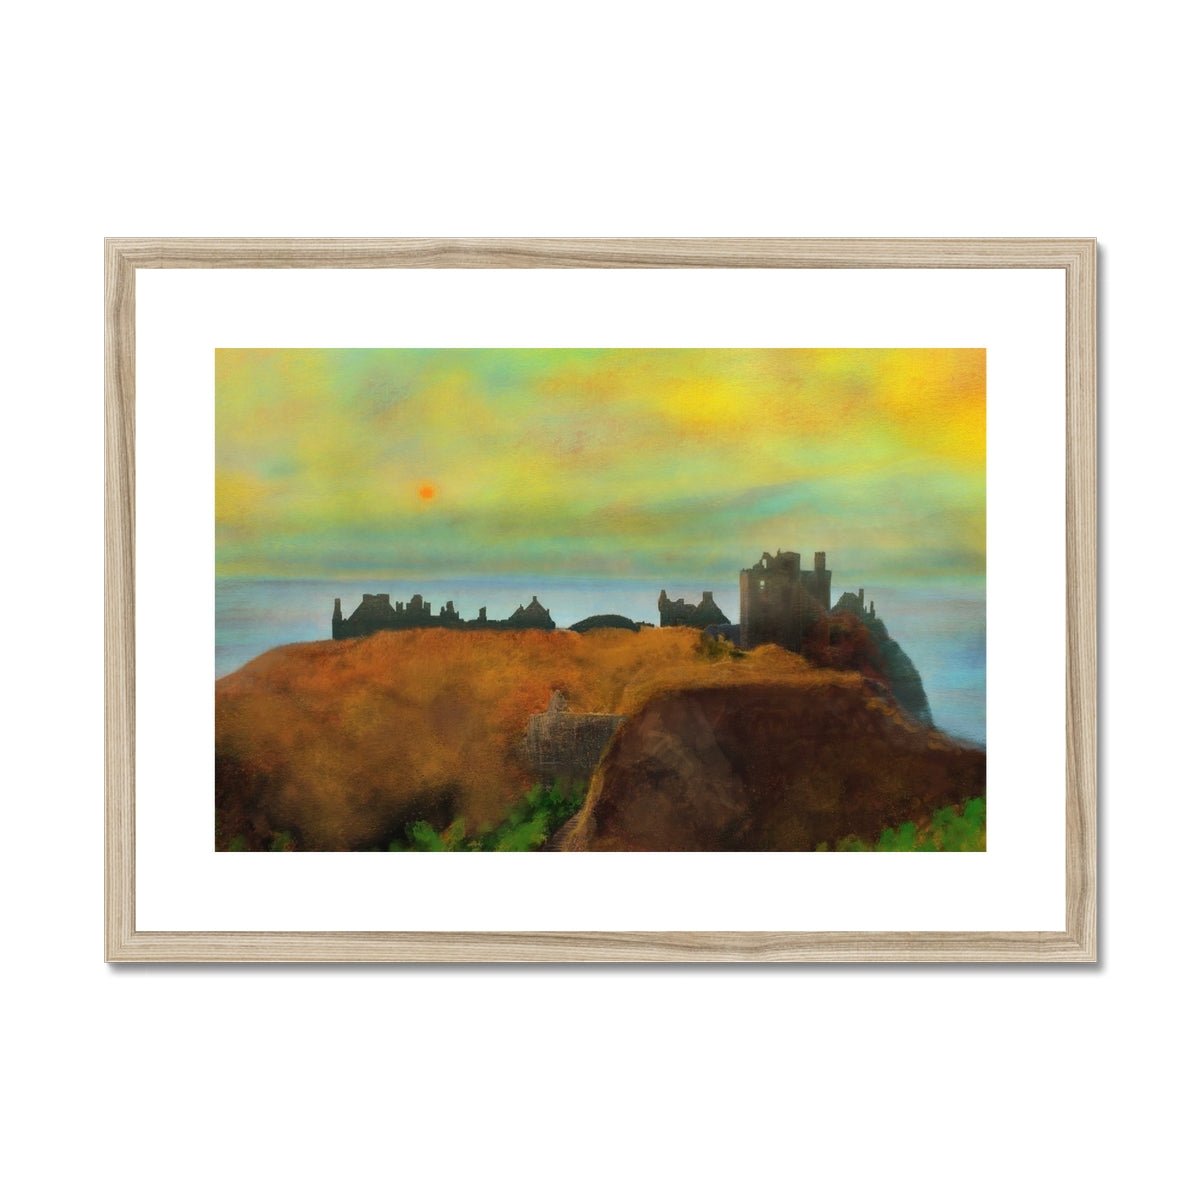 Dunnottar Castle Dusk Painting | Framed & Mounted Prints From Scotland-Framed & Mounted Prints-Historic & Iconic Scotland Art Gallery-A2 Landscape-Natural Frame-Paintings, Prints, Homeware, Art Gifts From Scotland By Scottish Artist Kevin Hunter